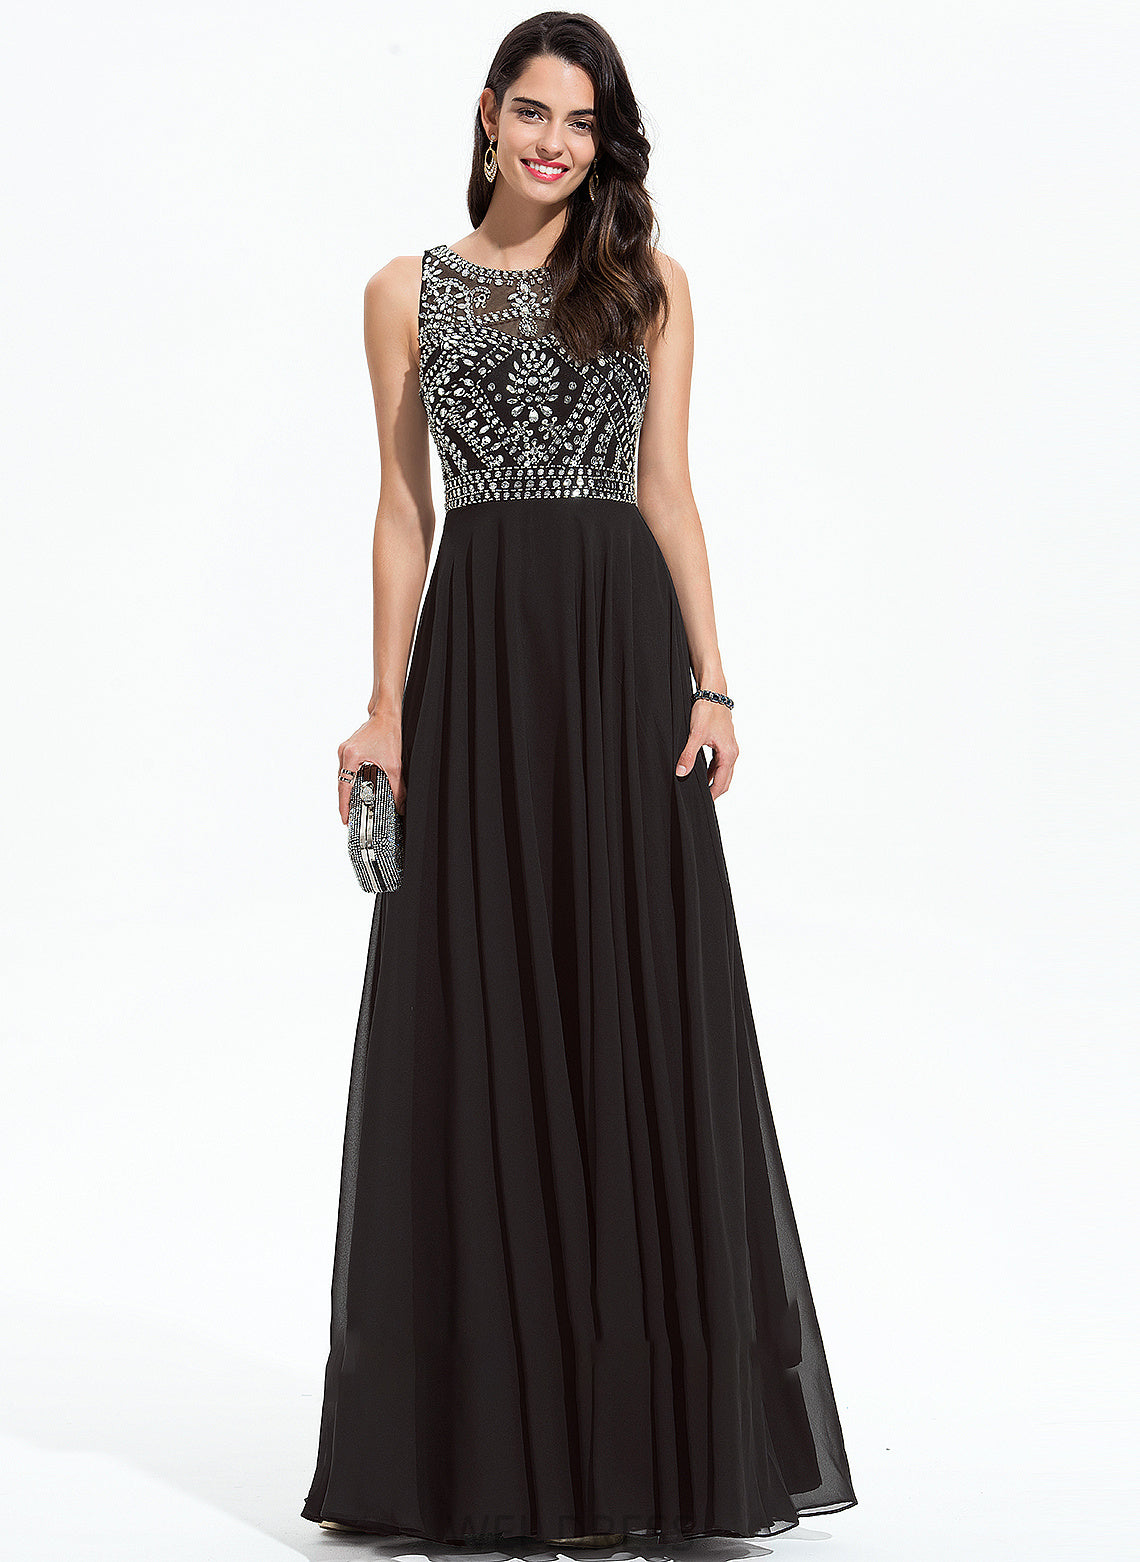 Prom Dresses Neck Scoop Chiffon Beading With A-Line Lilyana Floor-Length Sequins